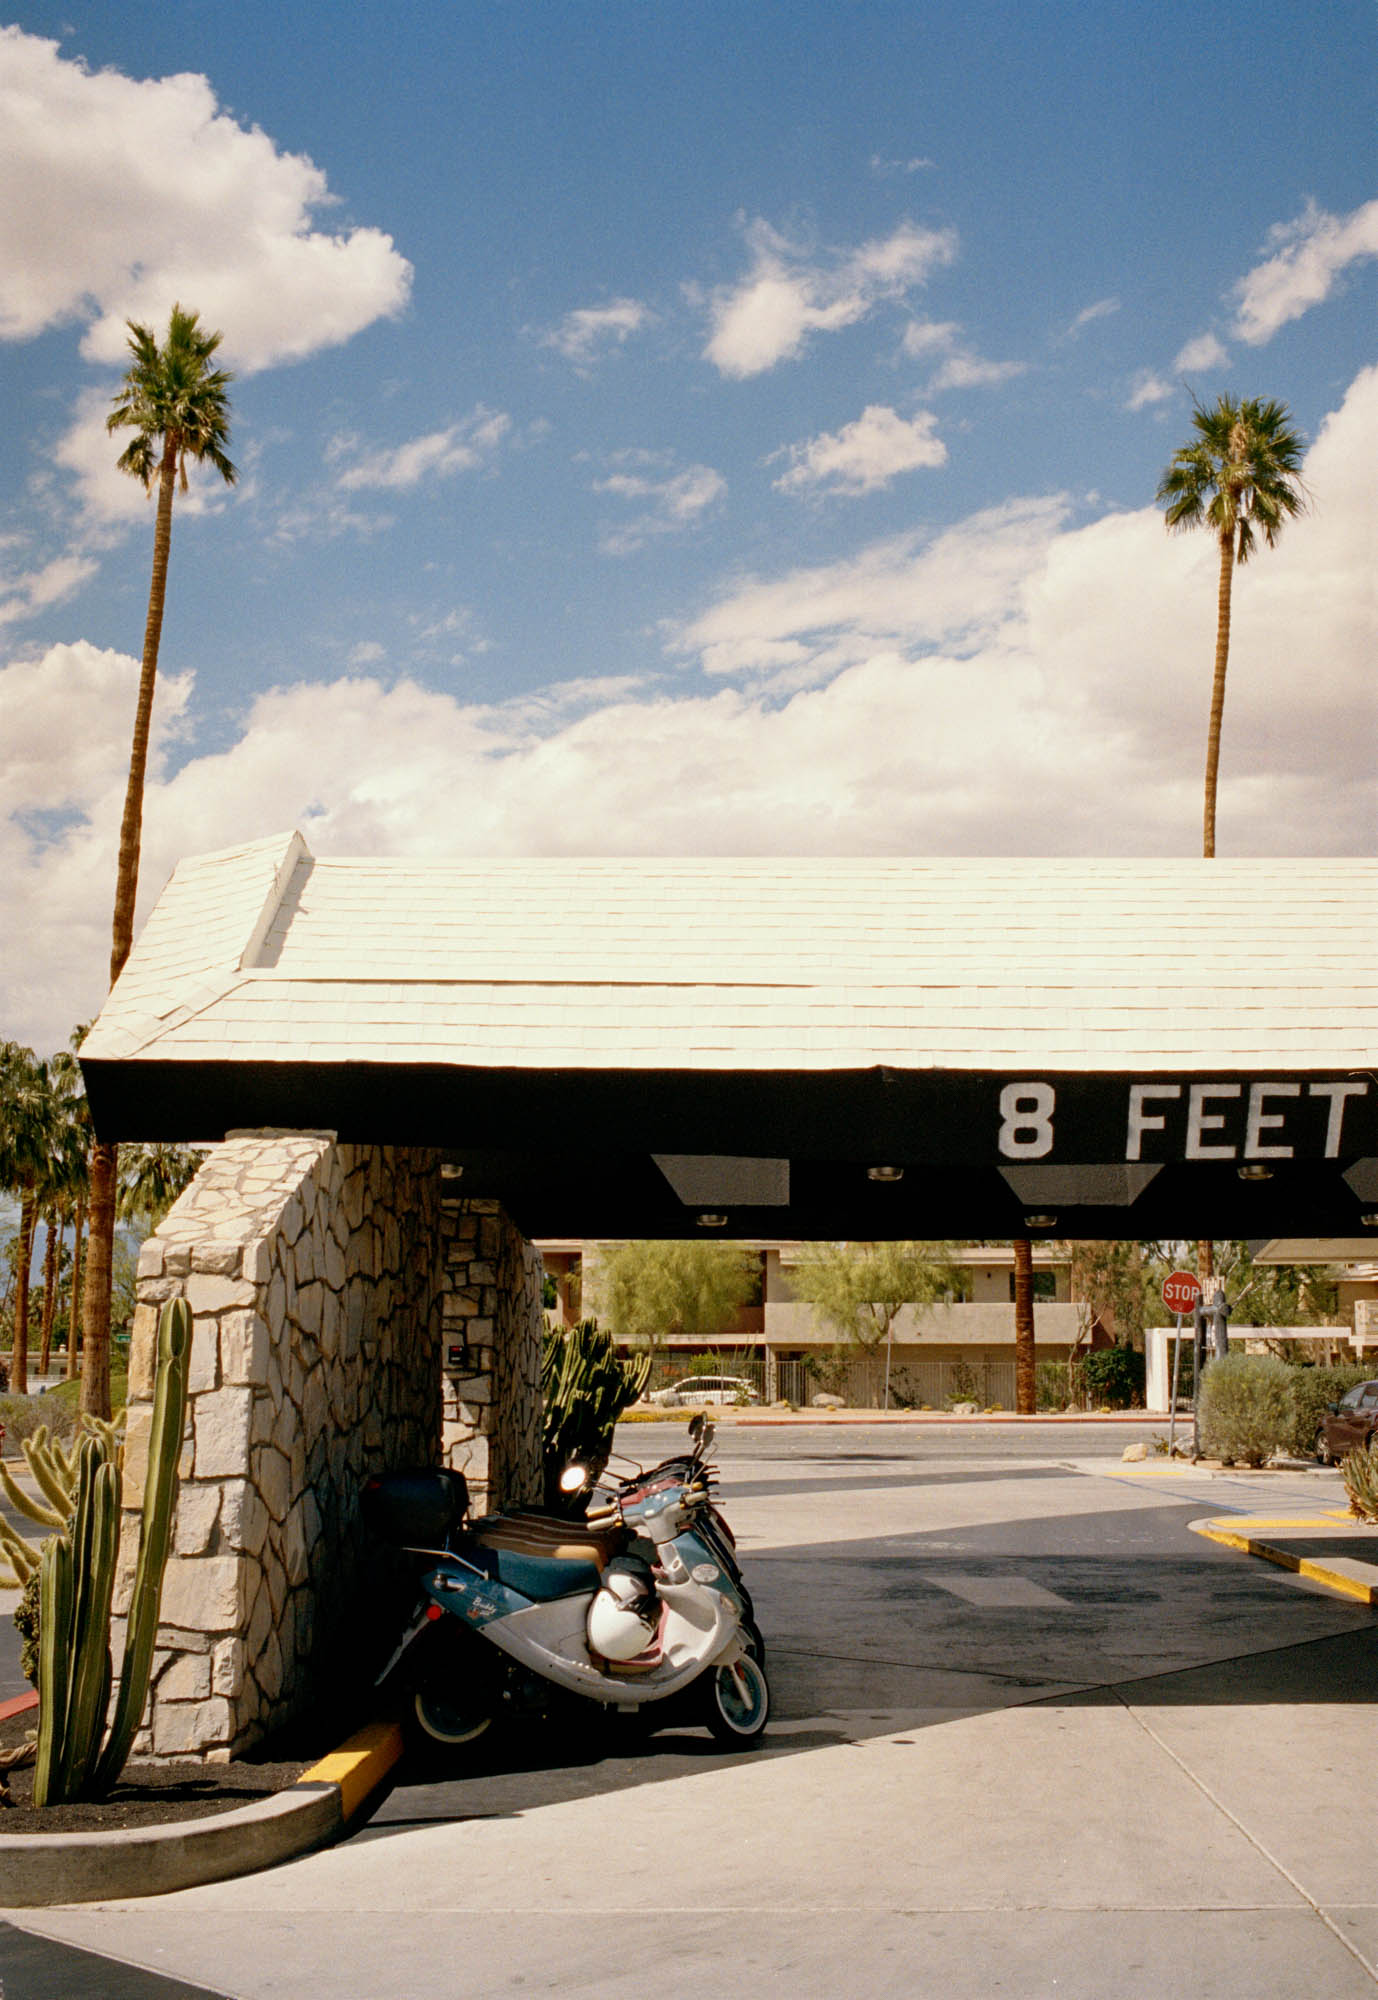 A photograph of a mid century motel in Palm Springs. There is an entrance with stone walls wth old scooters parked outside, there are palm trees & blue skies.